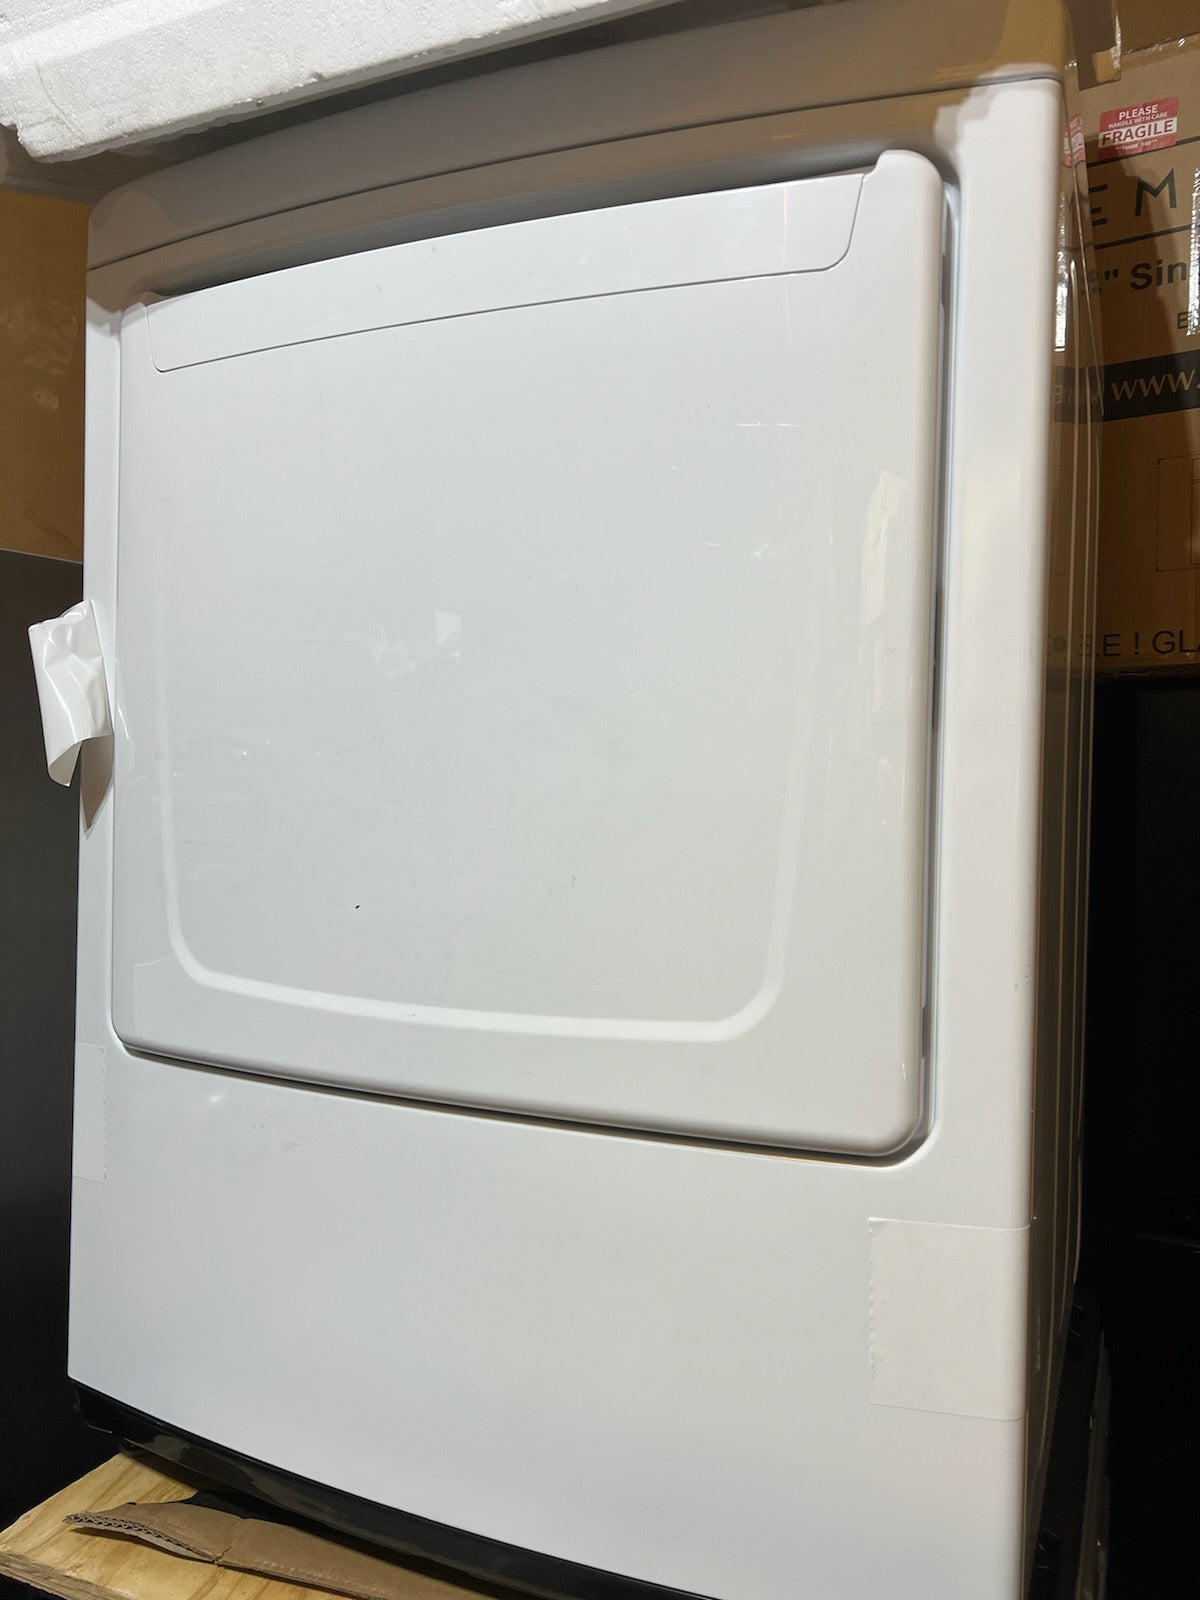 LG 7.3 Cu. Ft. Vented Electric Dryer in White with Sensor Dry